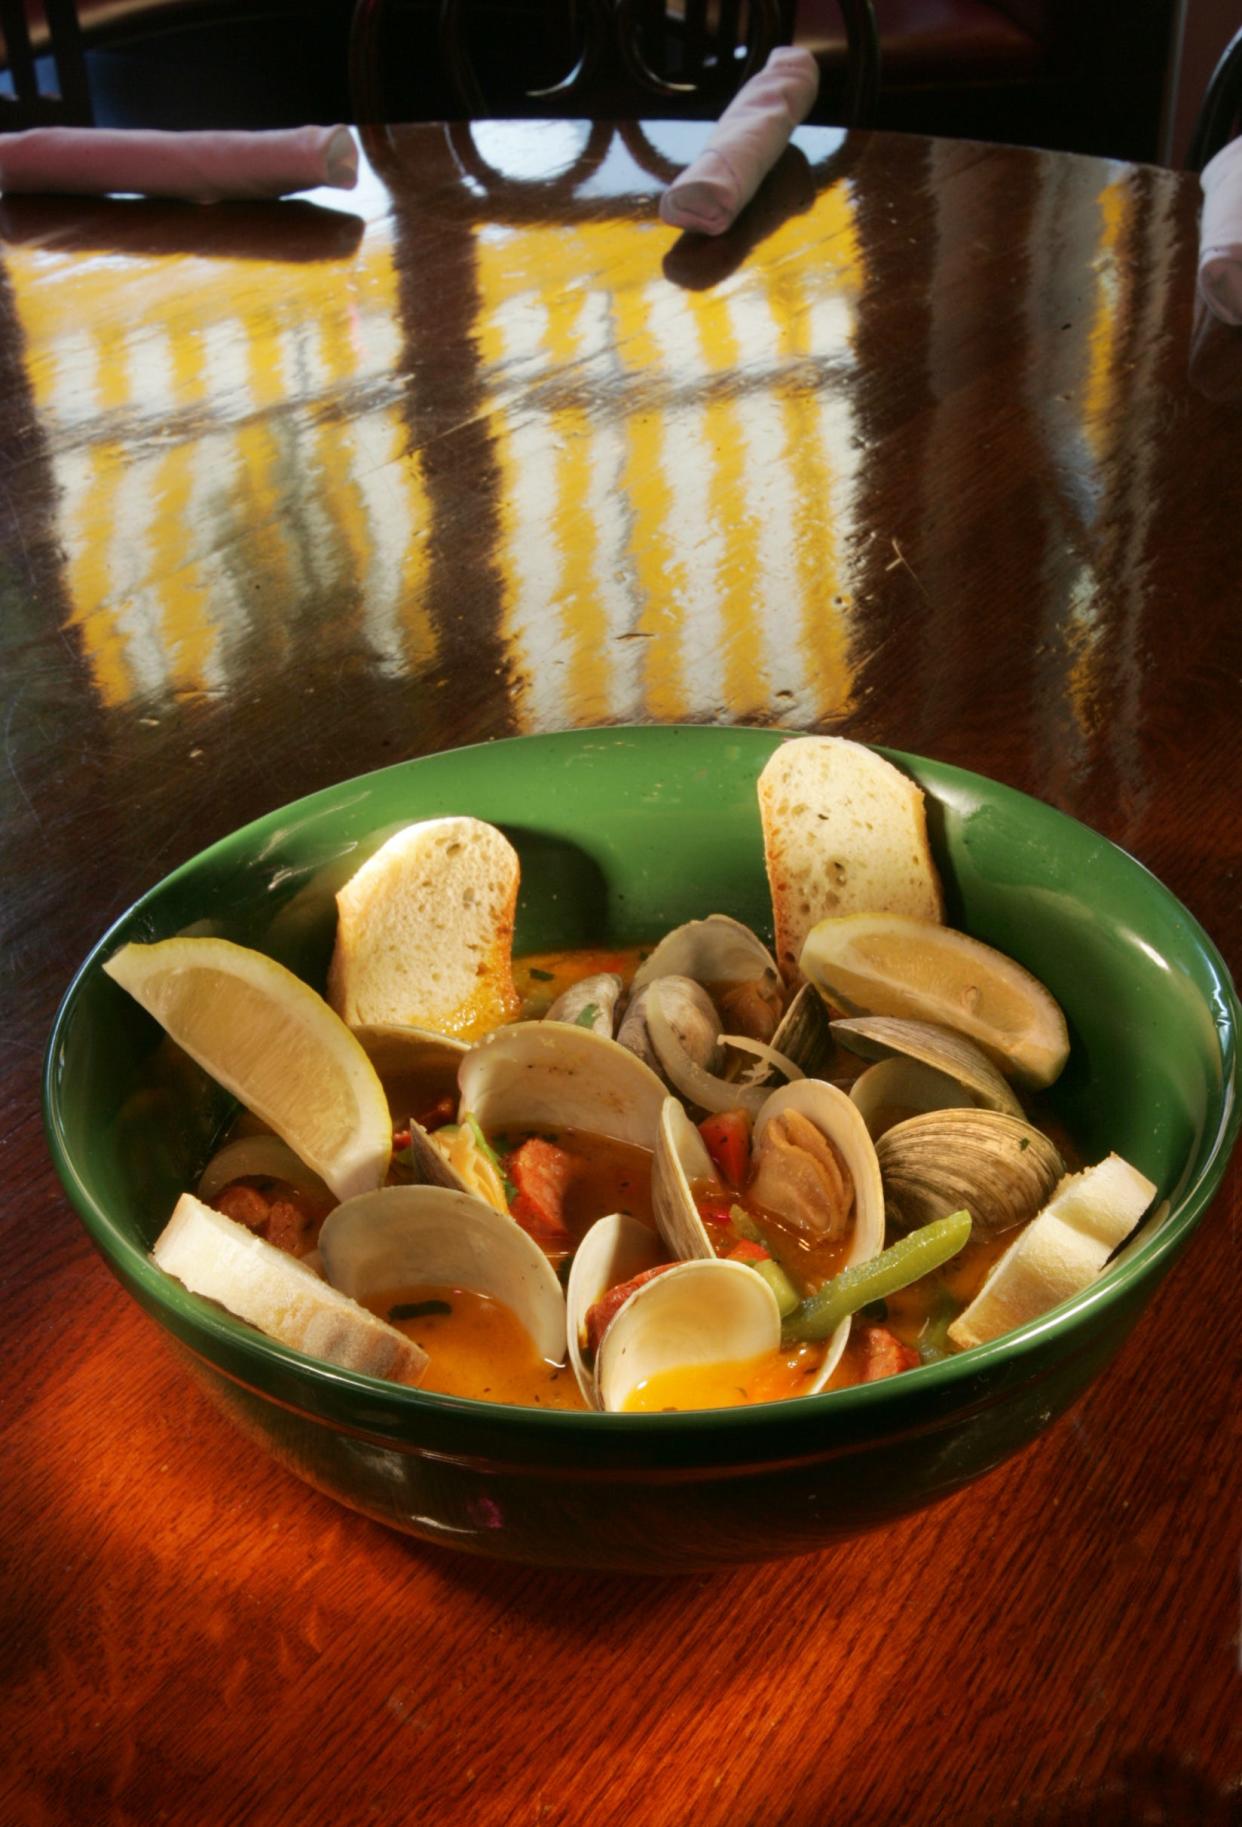 Gary's Portuguese Littlenecks are a signature appetizer at Brick Alley Pub. They are a homage to late chef Gary Mathias.